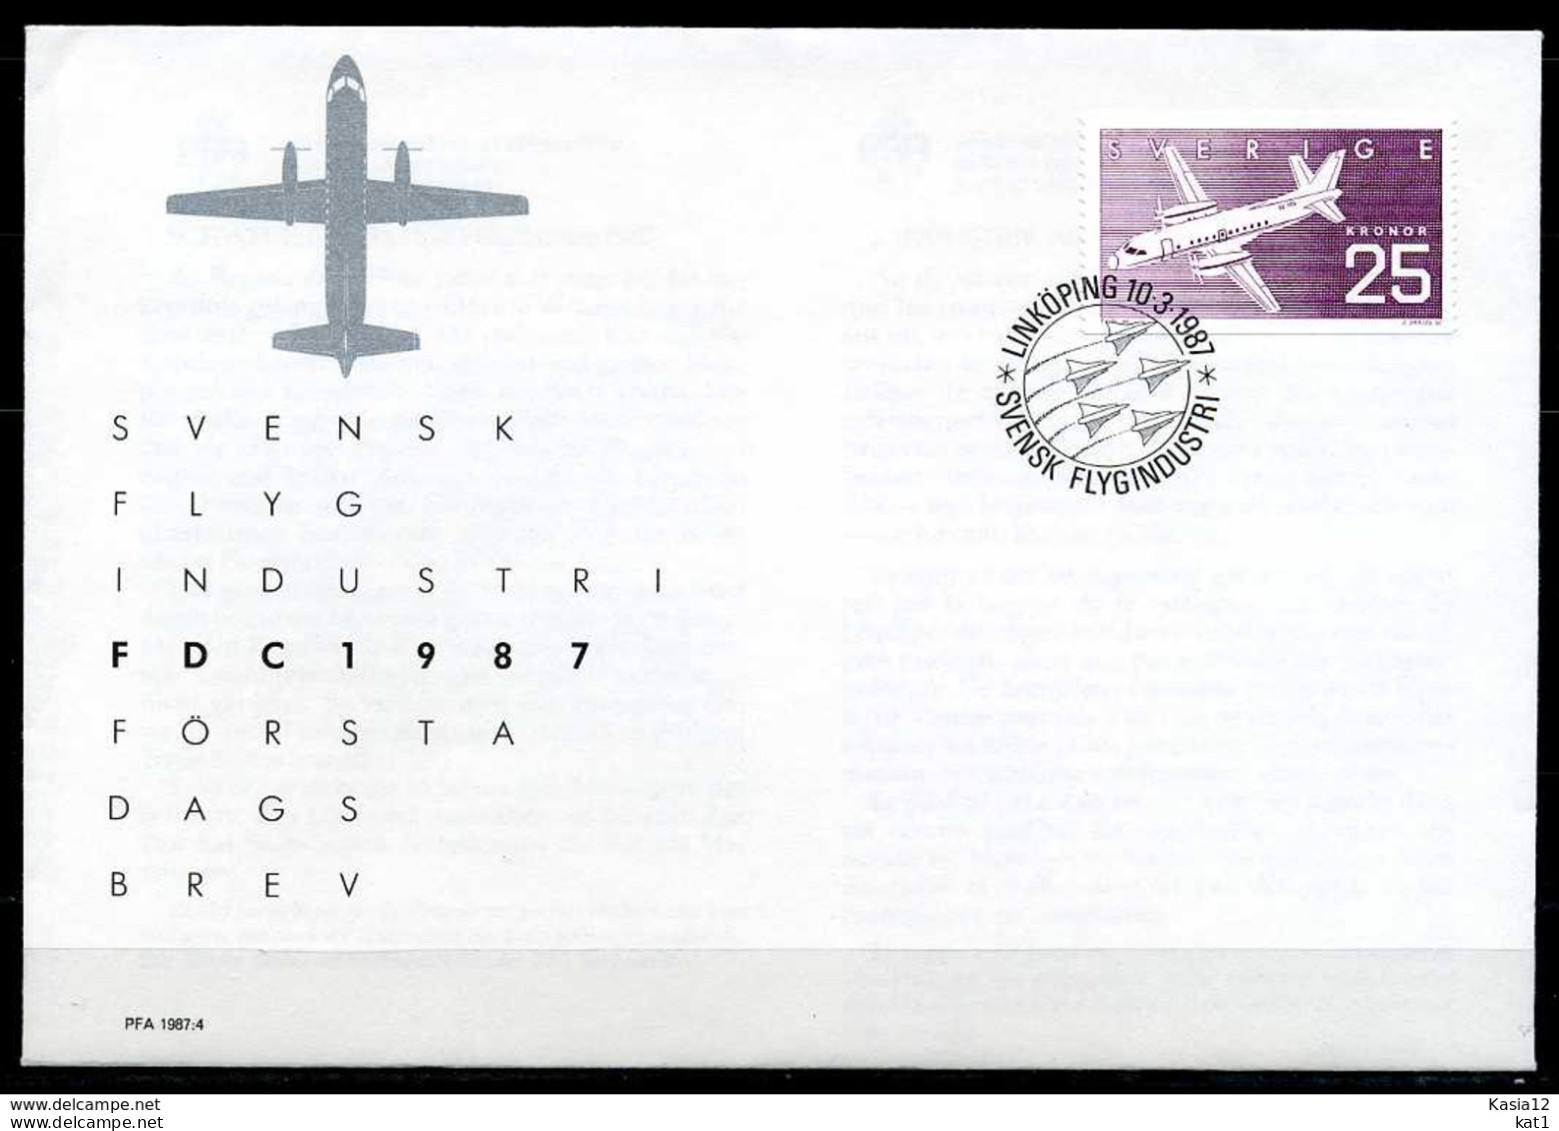 F0767)Schweden FDC 1427 Flugzeug - Covers & Documents